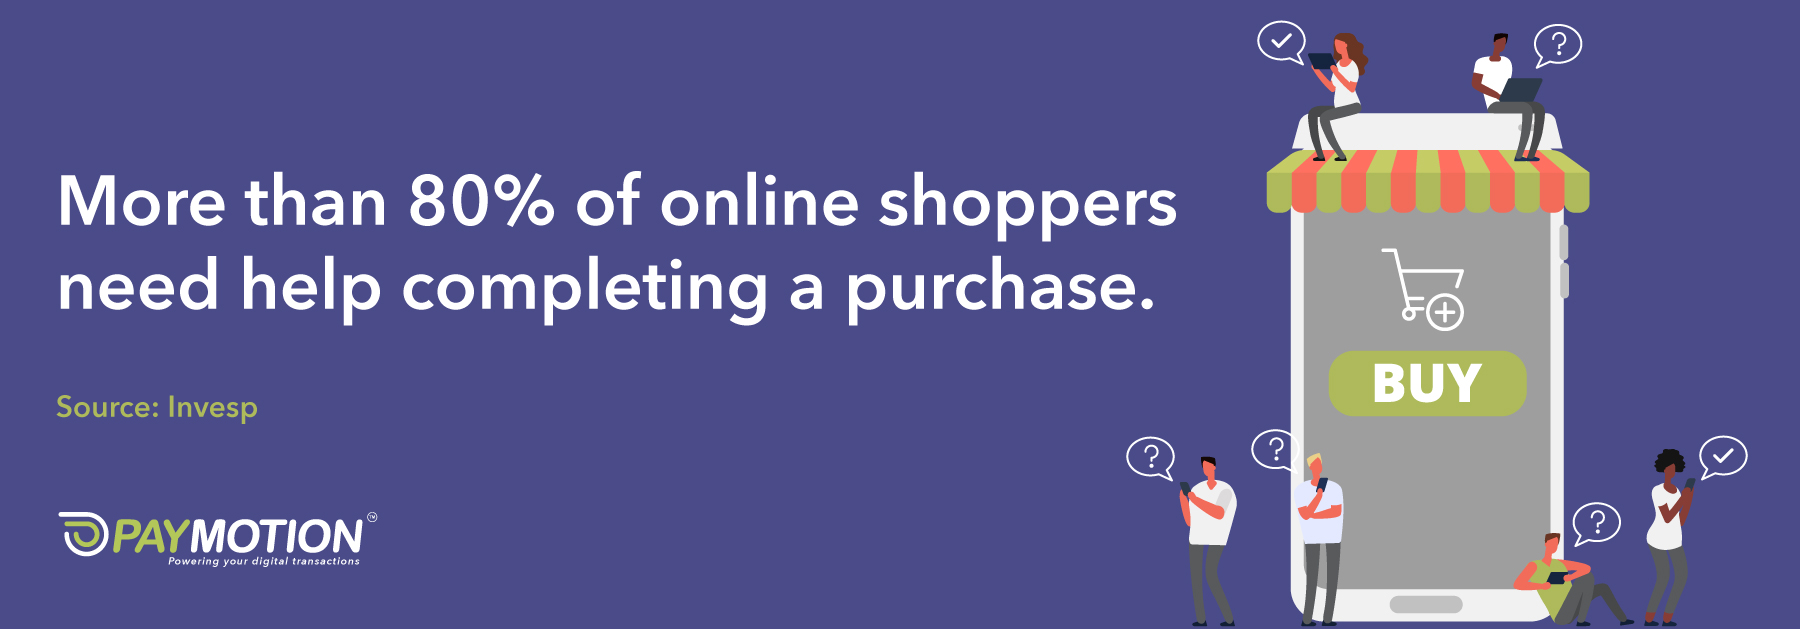 More than 80% of online shoppers need help completing a purchase. 